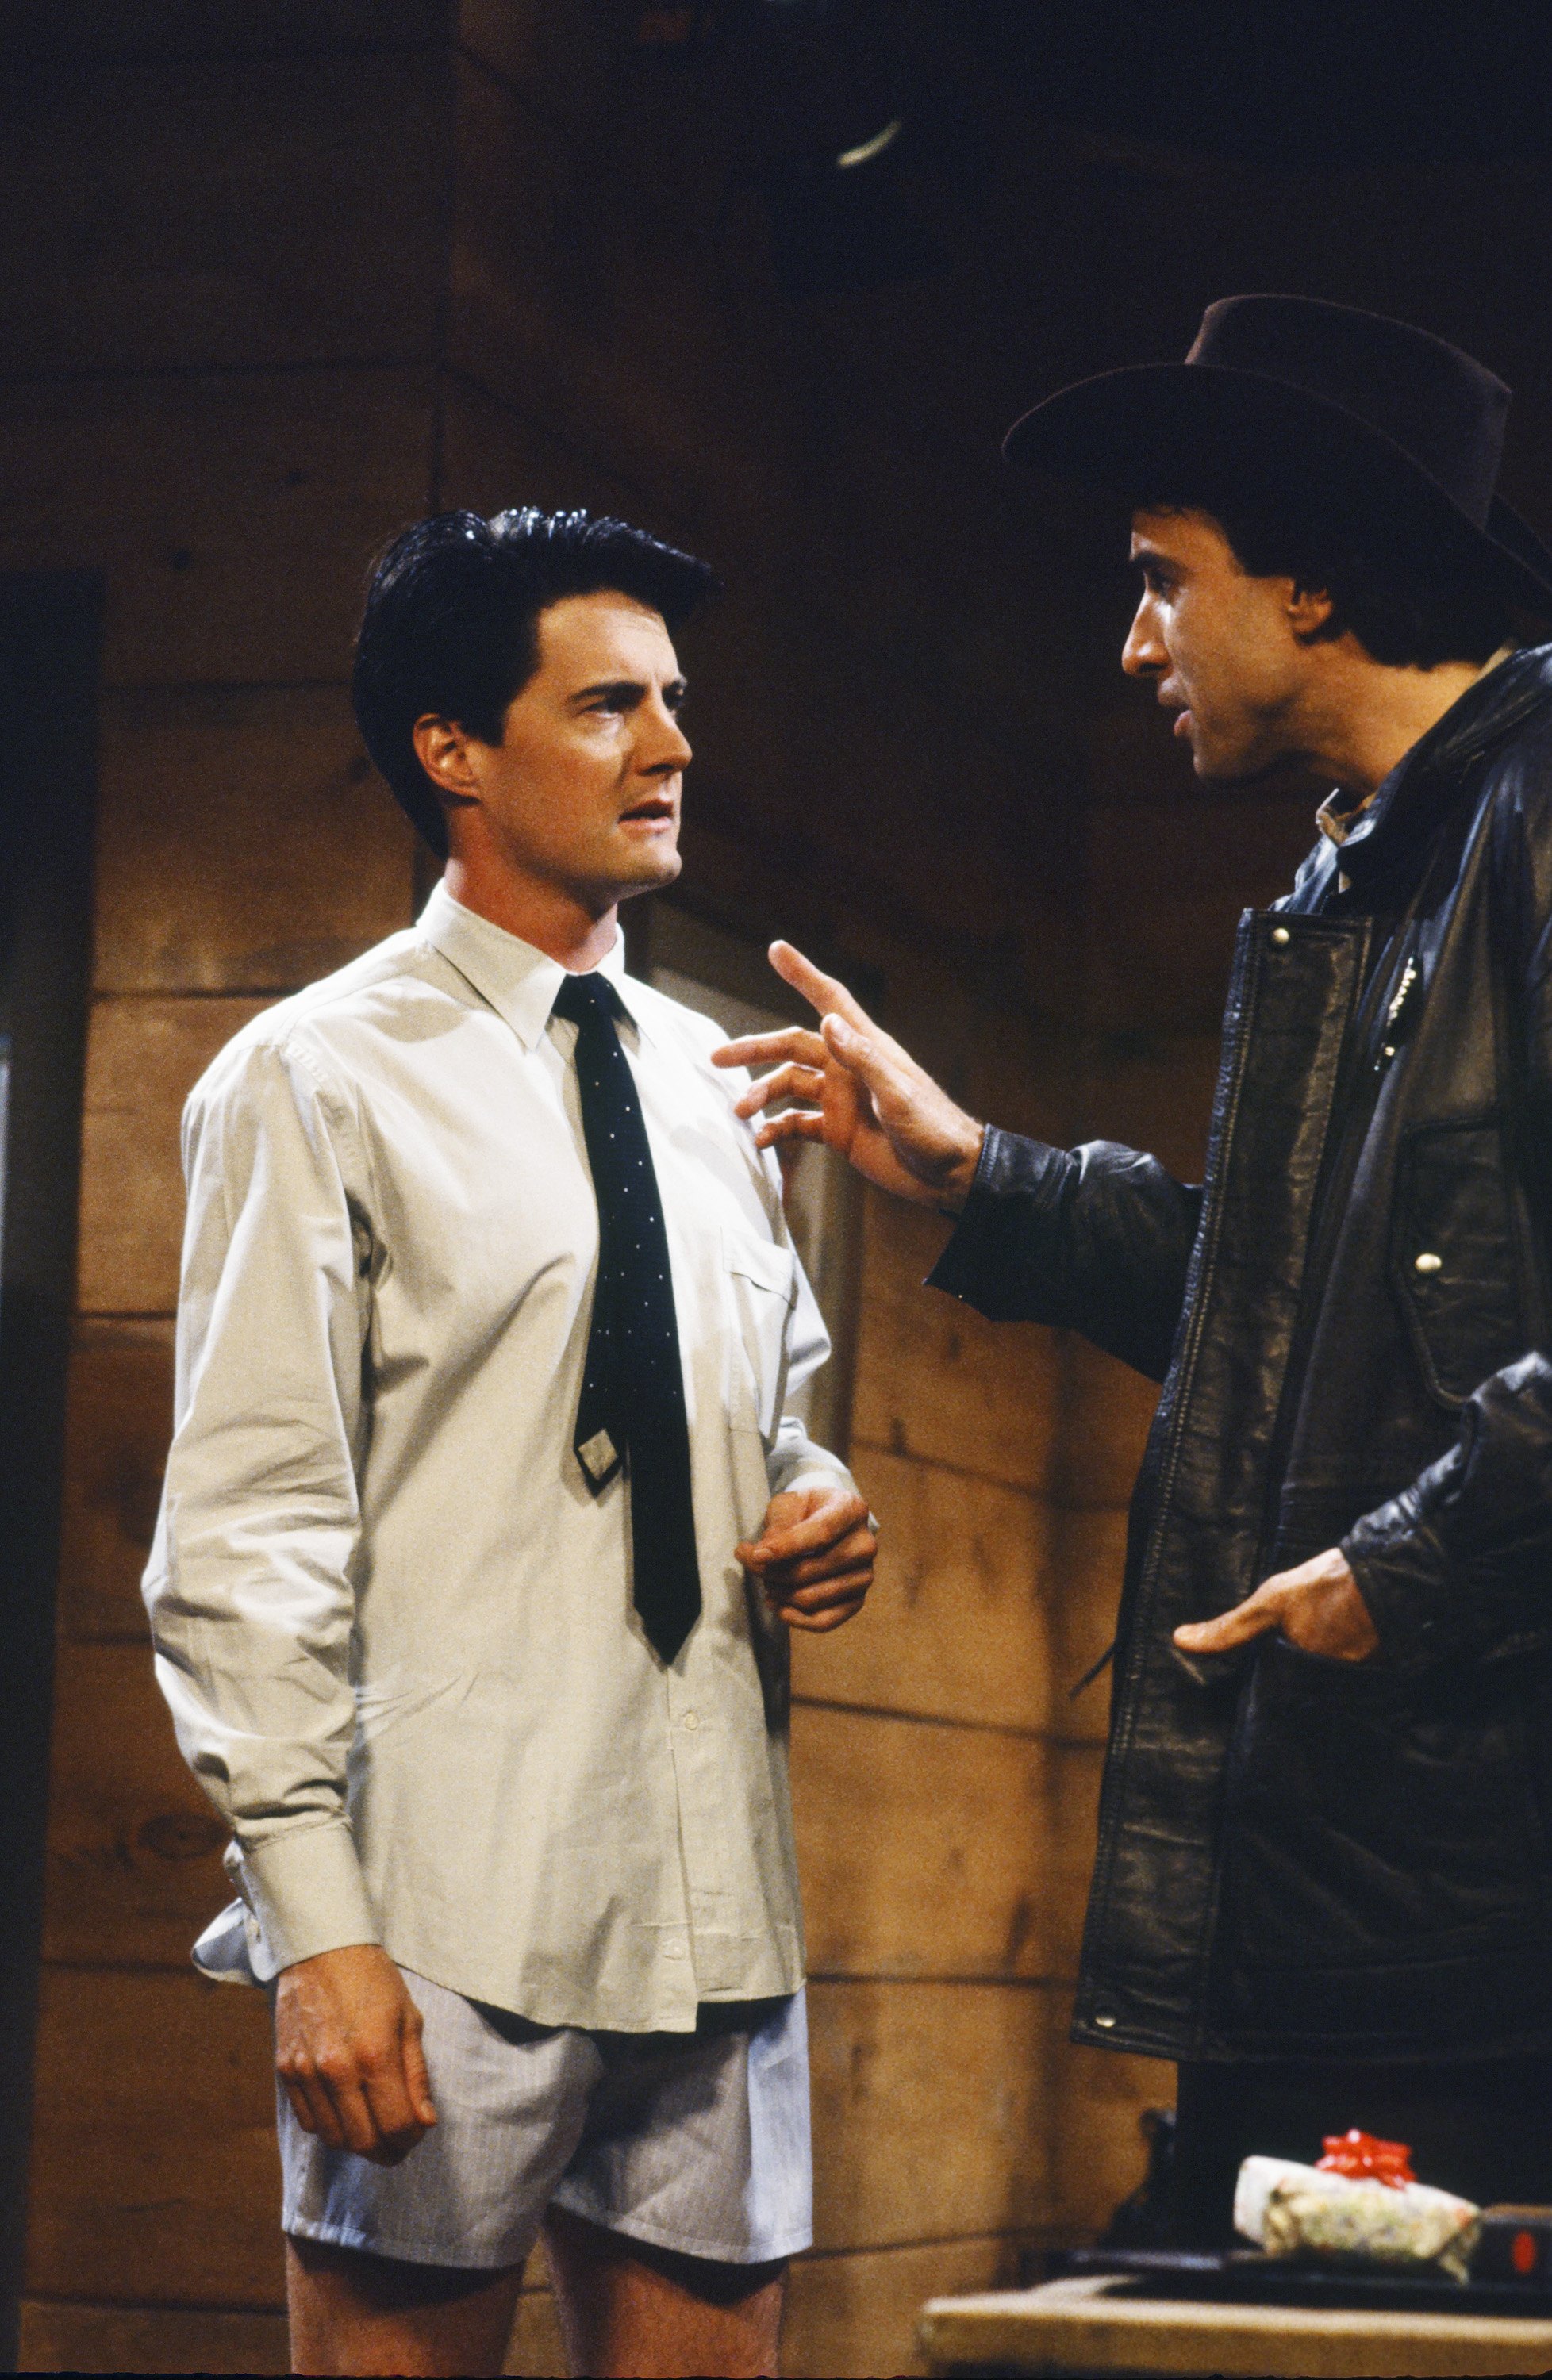 Kyle MacLachlan and Kevin Nealon on the set of "Twin Peaks" in 1990. | Source: Getty Images